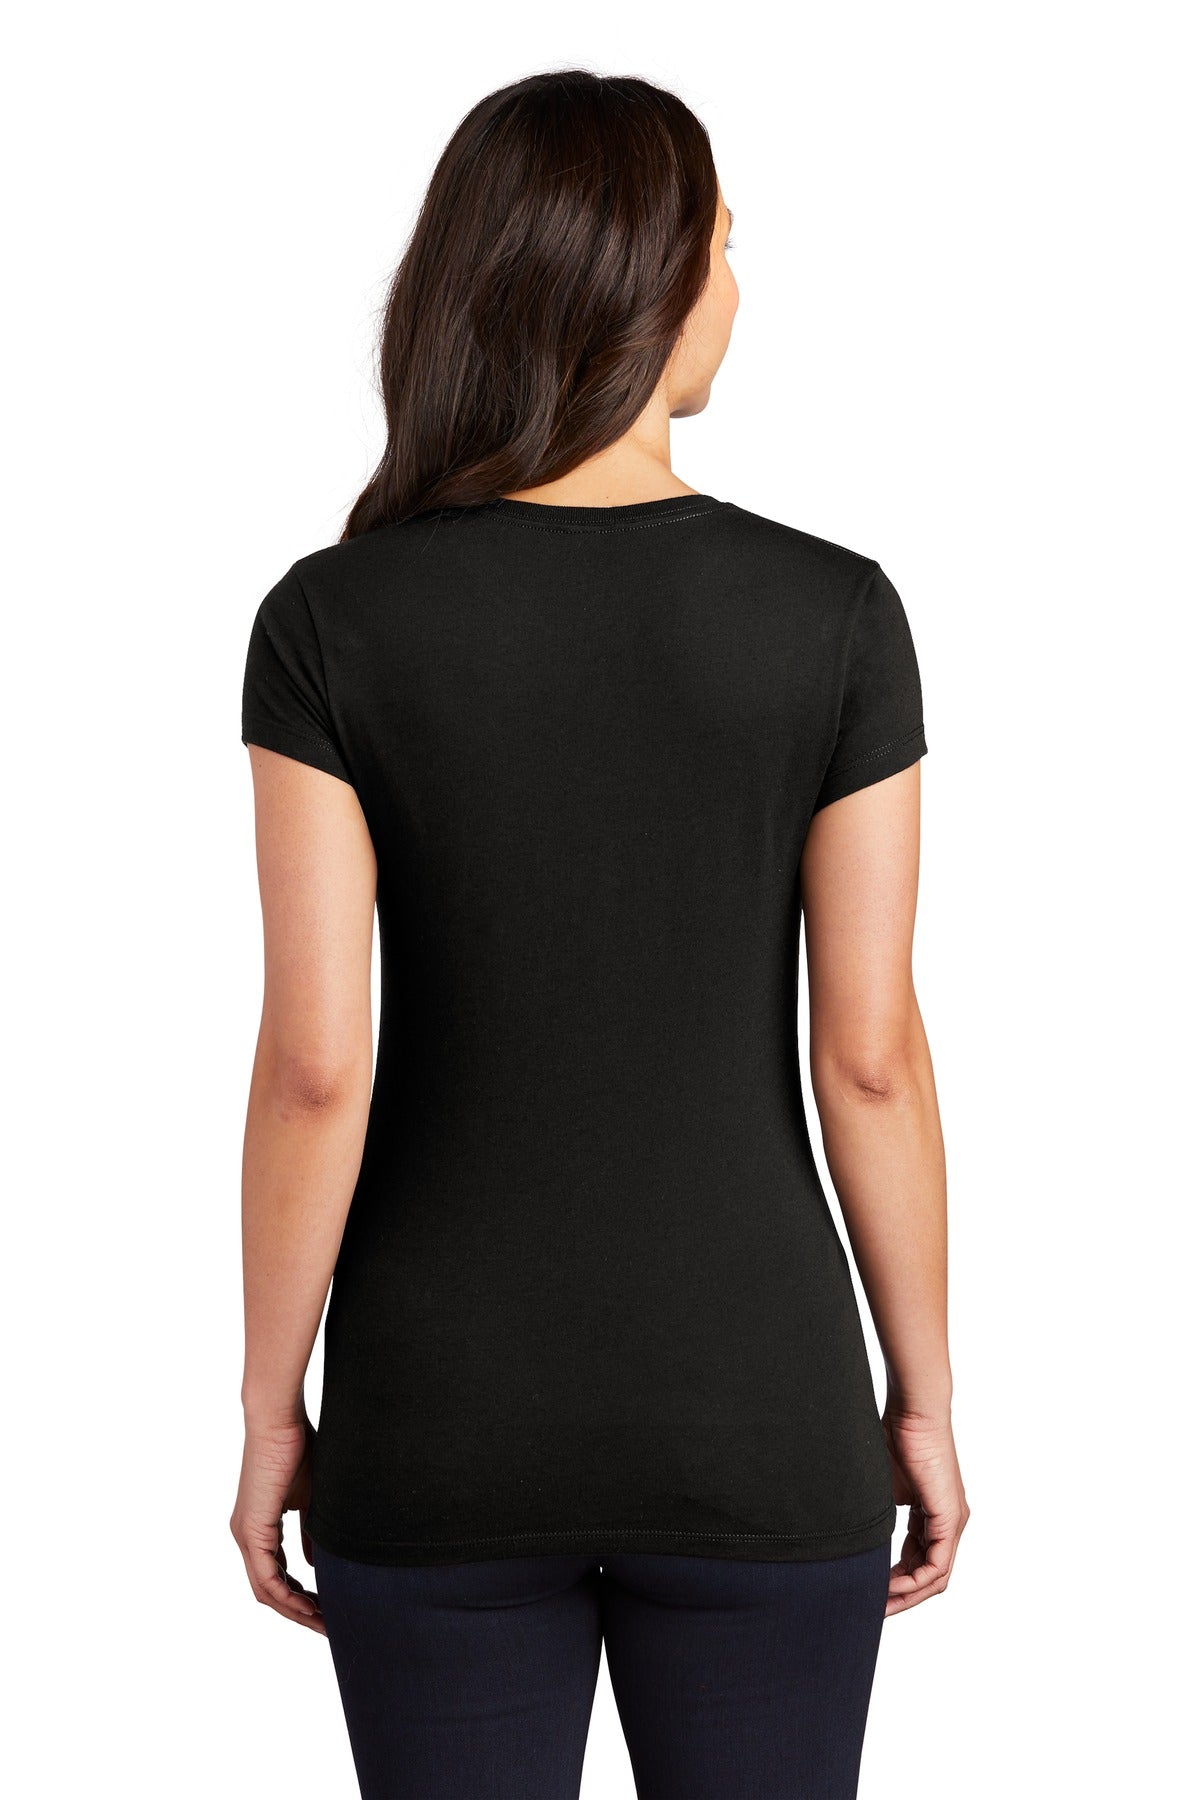 District ® Women's Fitted Perfect Tri ® Tee. DT155 - DFW Impression